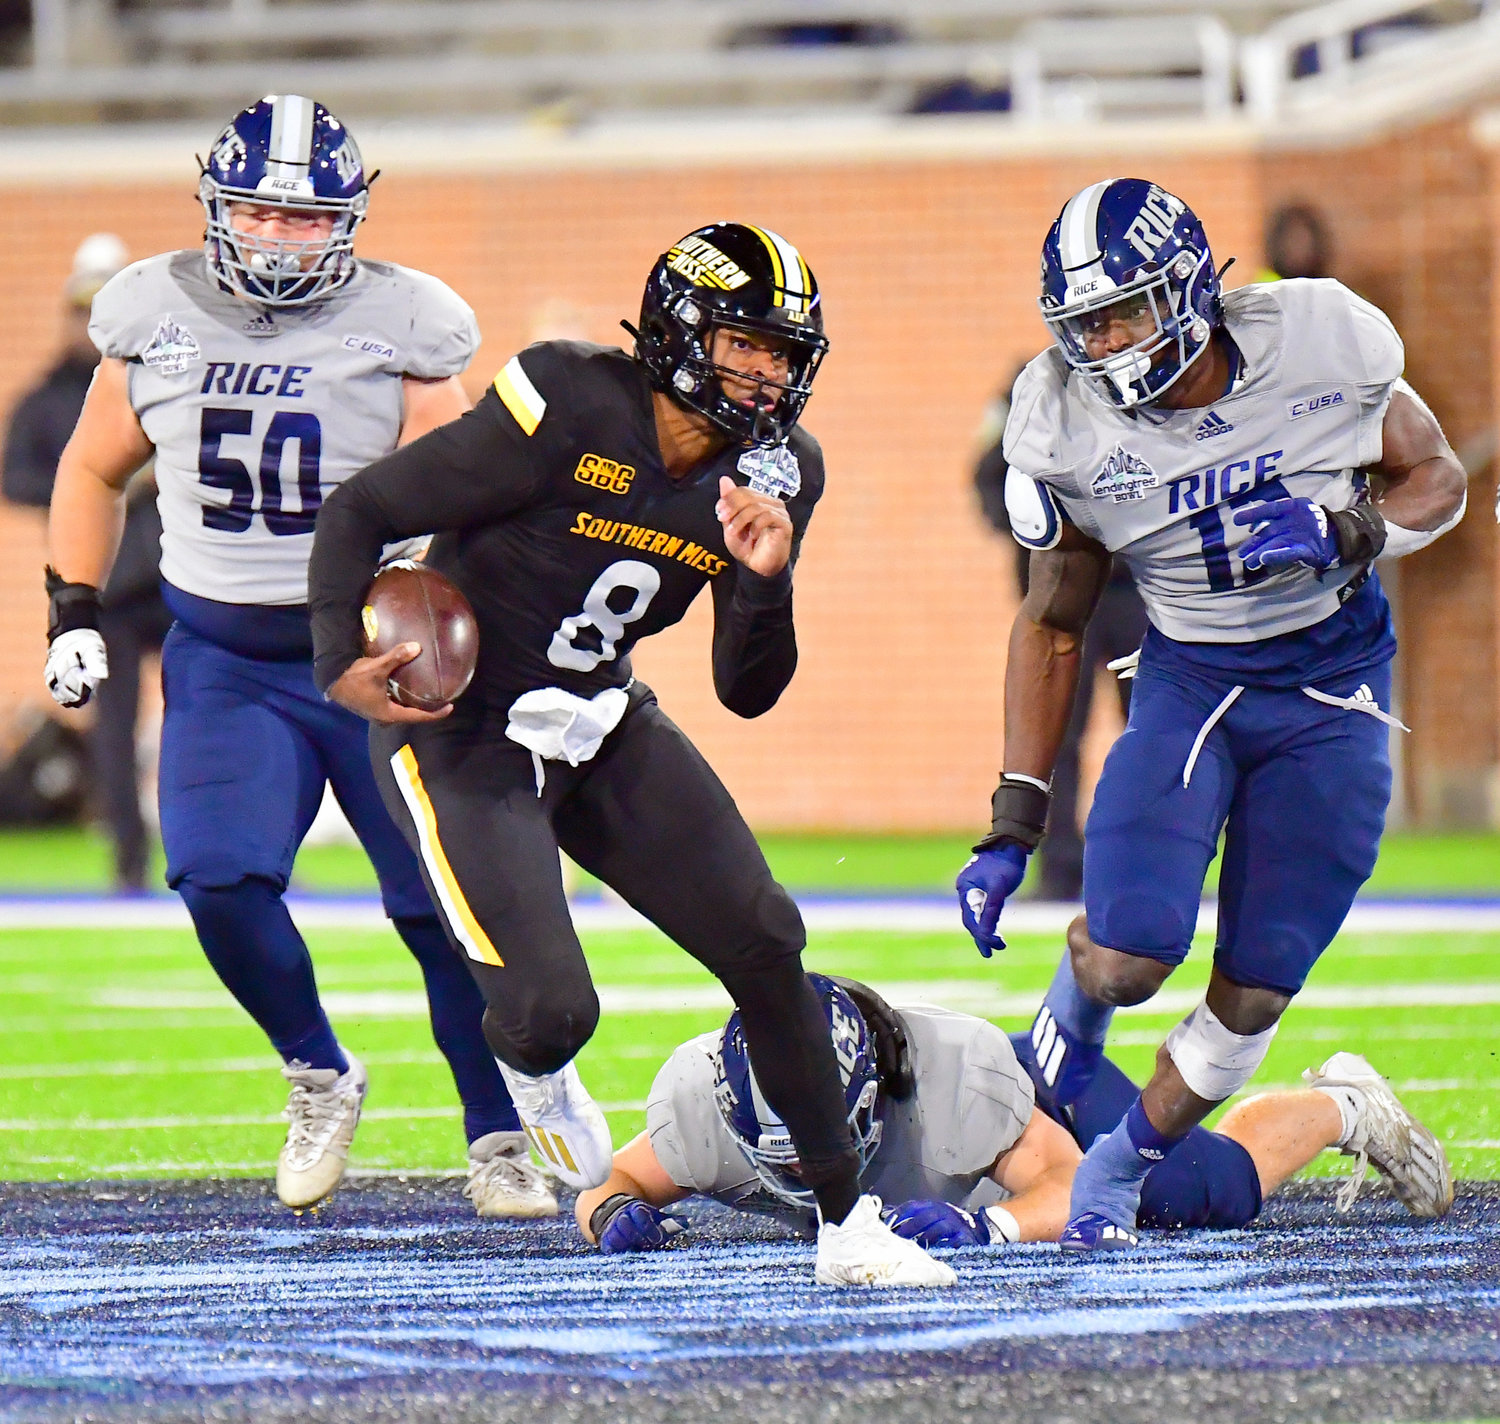 Golden Eagle quarterback Trey Lowe III makes a move while scrambling out of the pocket in the second half of the Lending Tree Bowl between Southern Miss and Rice at Hancock Whitney Stadium in Mobile Saturday night, Dec. 17.